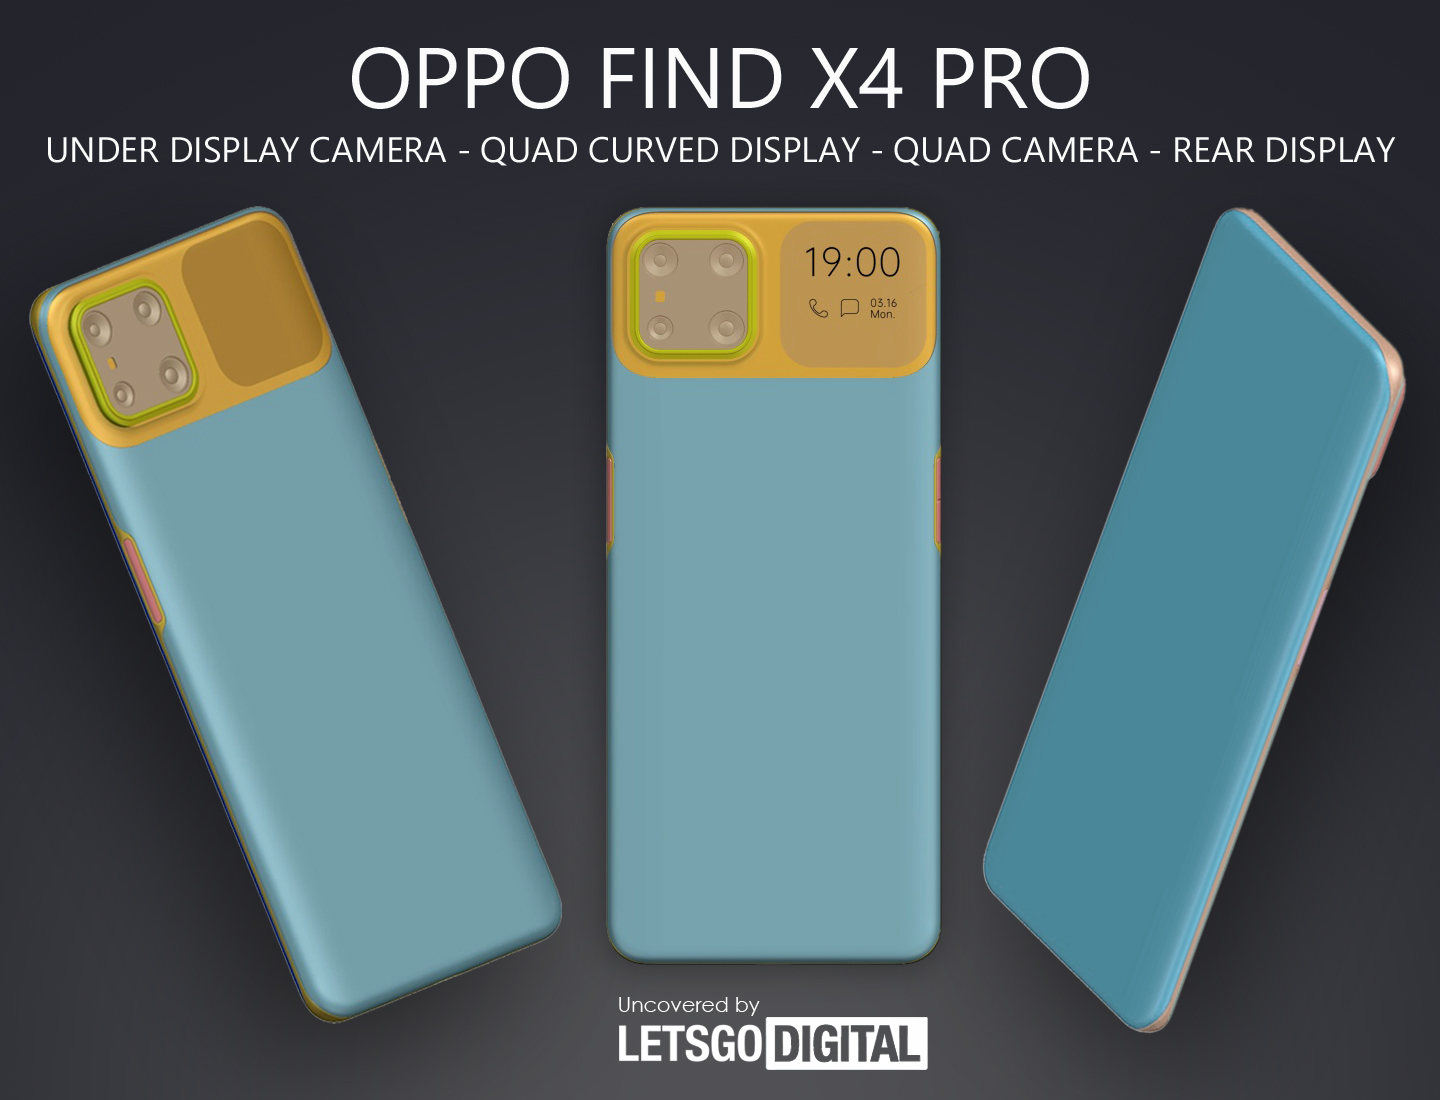 OPPO Find X4 Pro will receive an additional screen next to the main camera and a sub-screen front